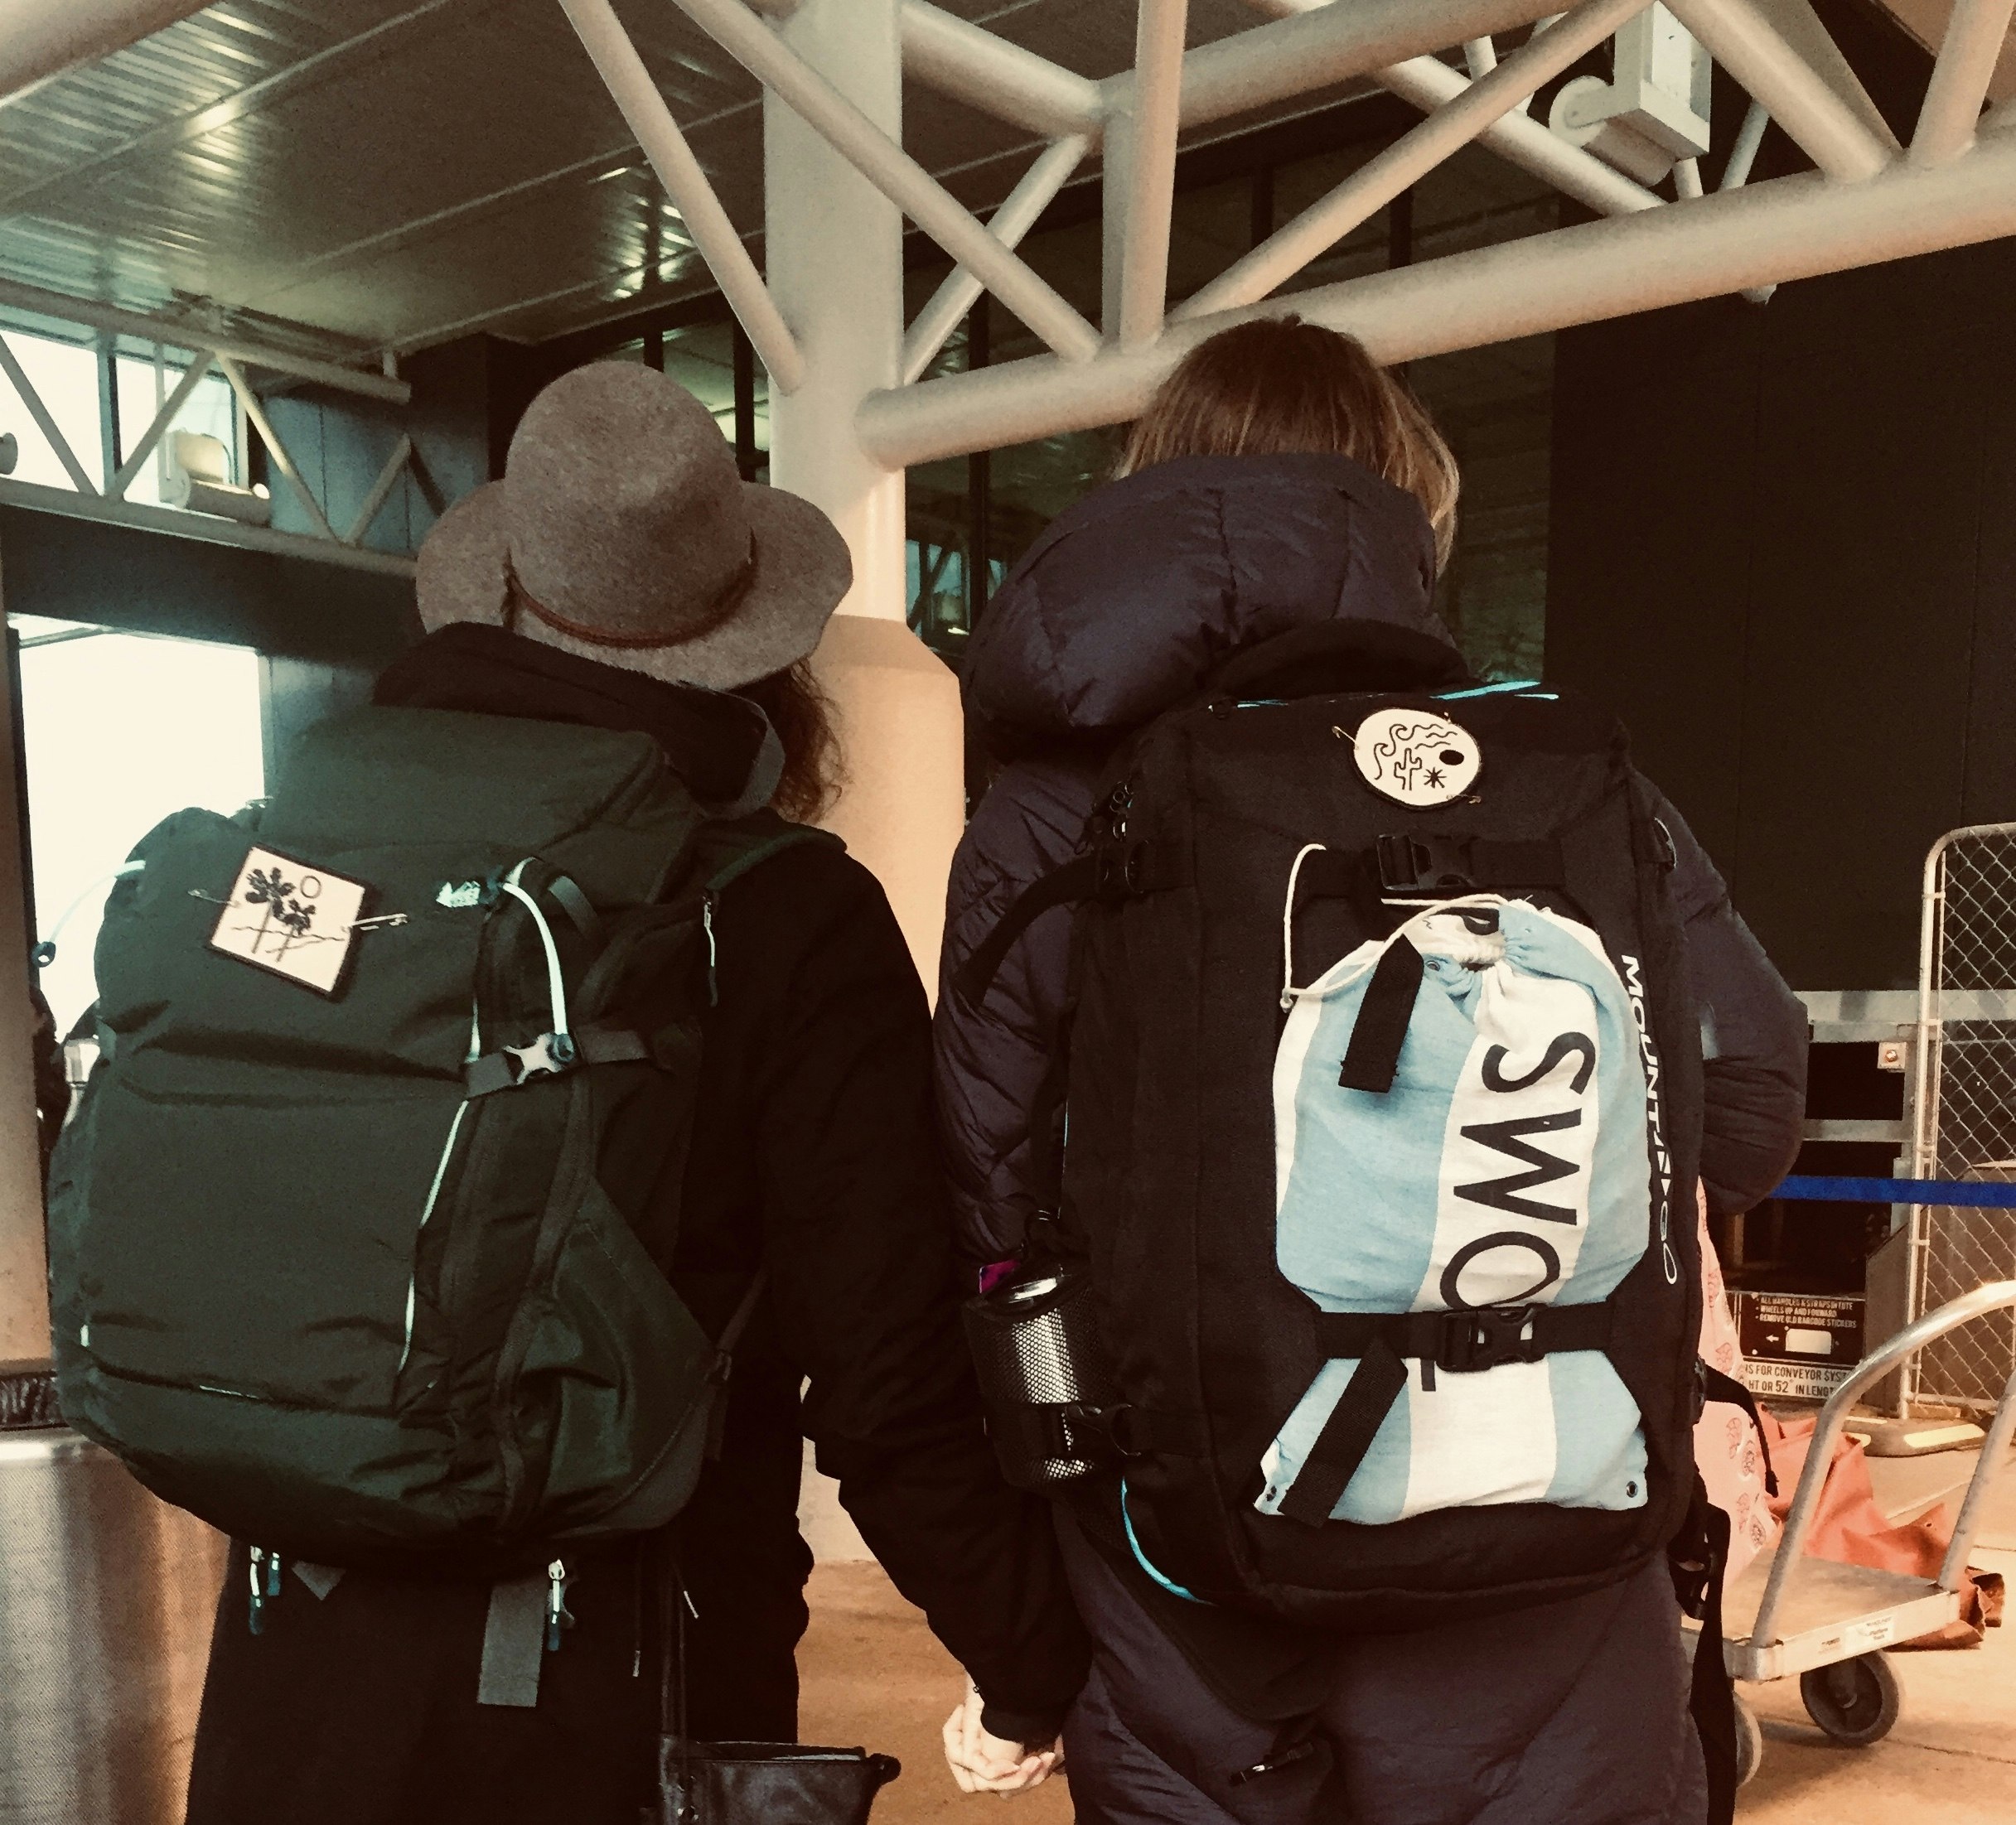 Nik and Lindsey stand with their backs to the camera, both wearing coats and carrying backpacks. They are holding hands, and are facing the entrance to the Newark Airport